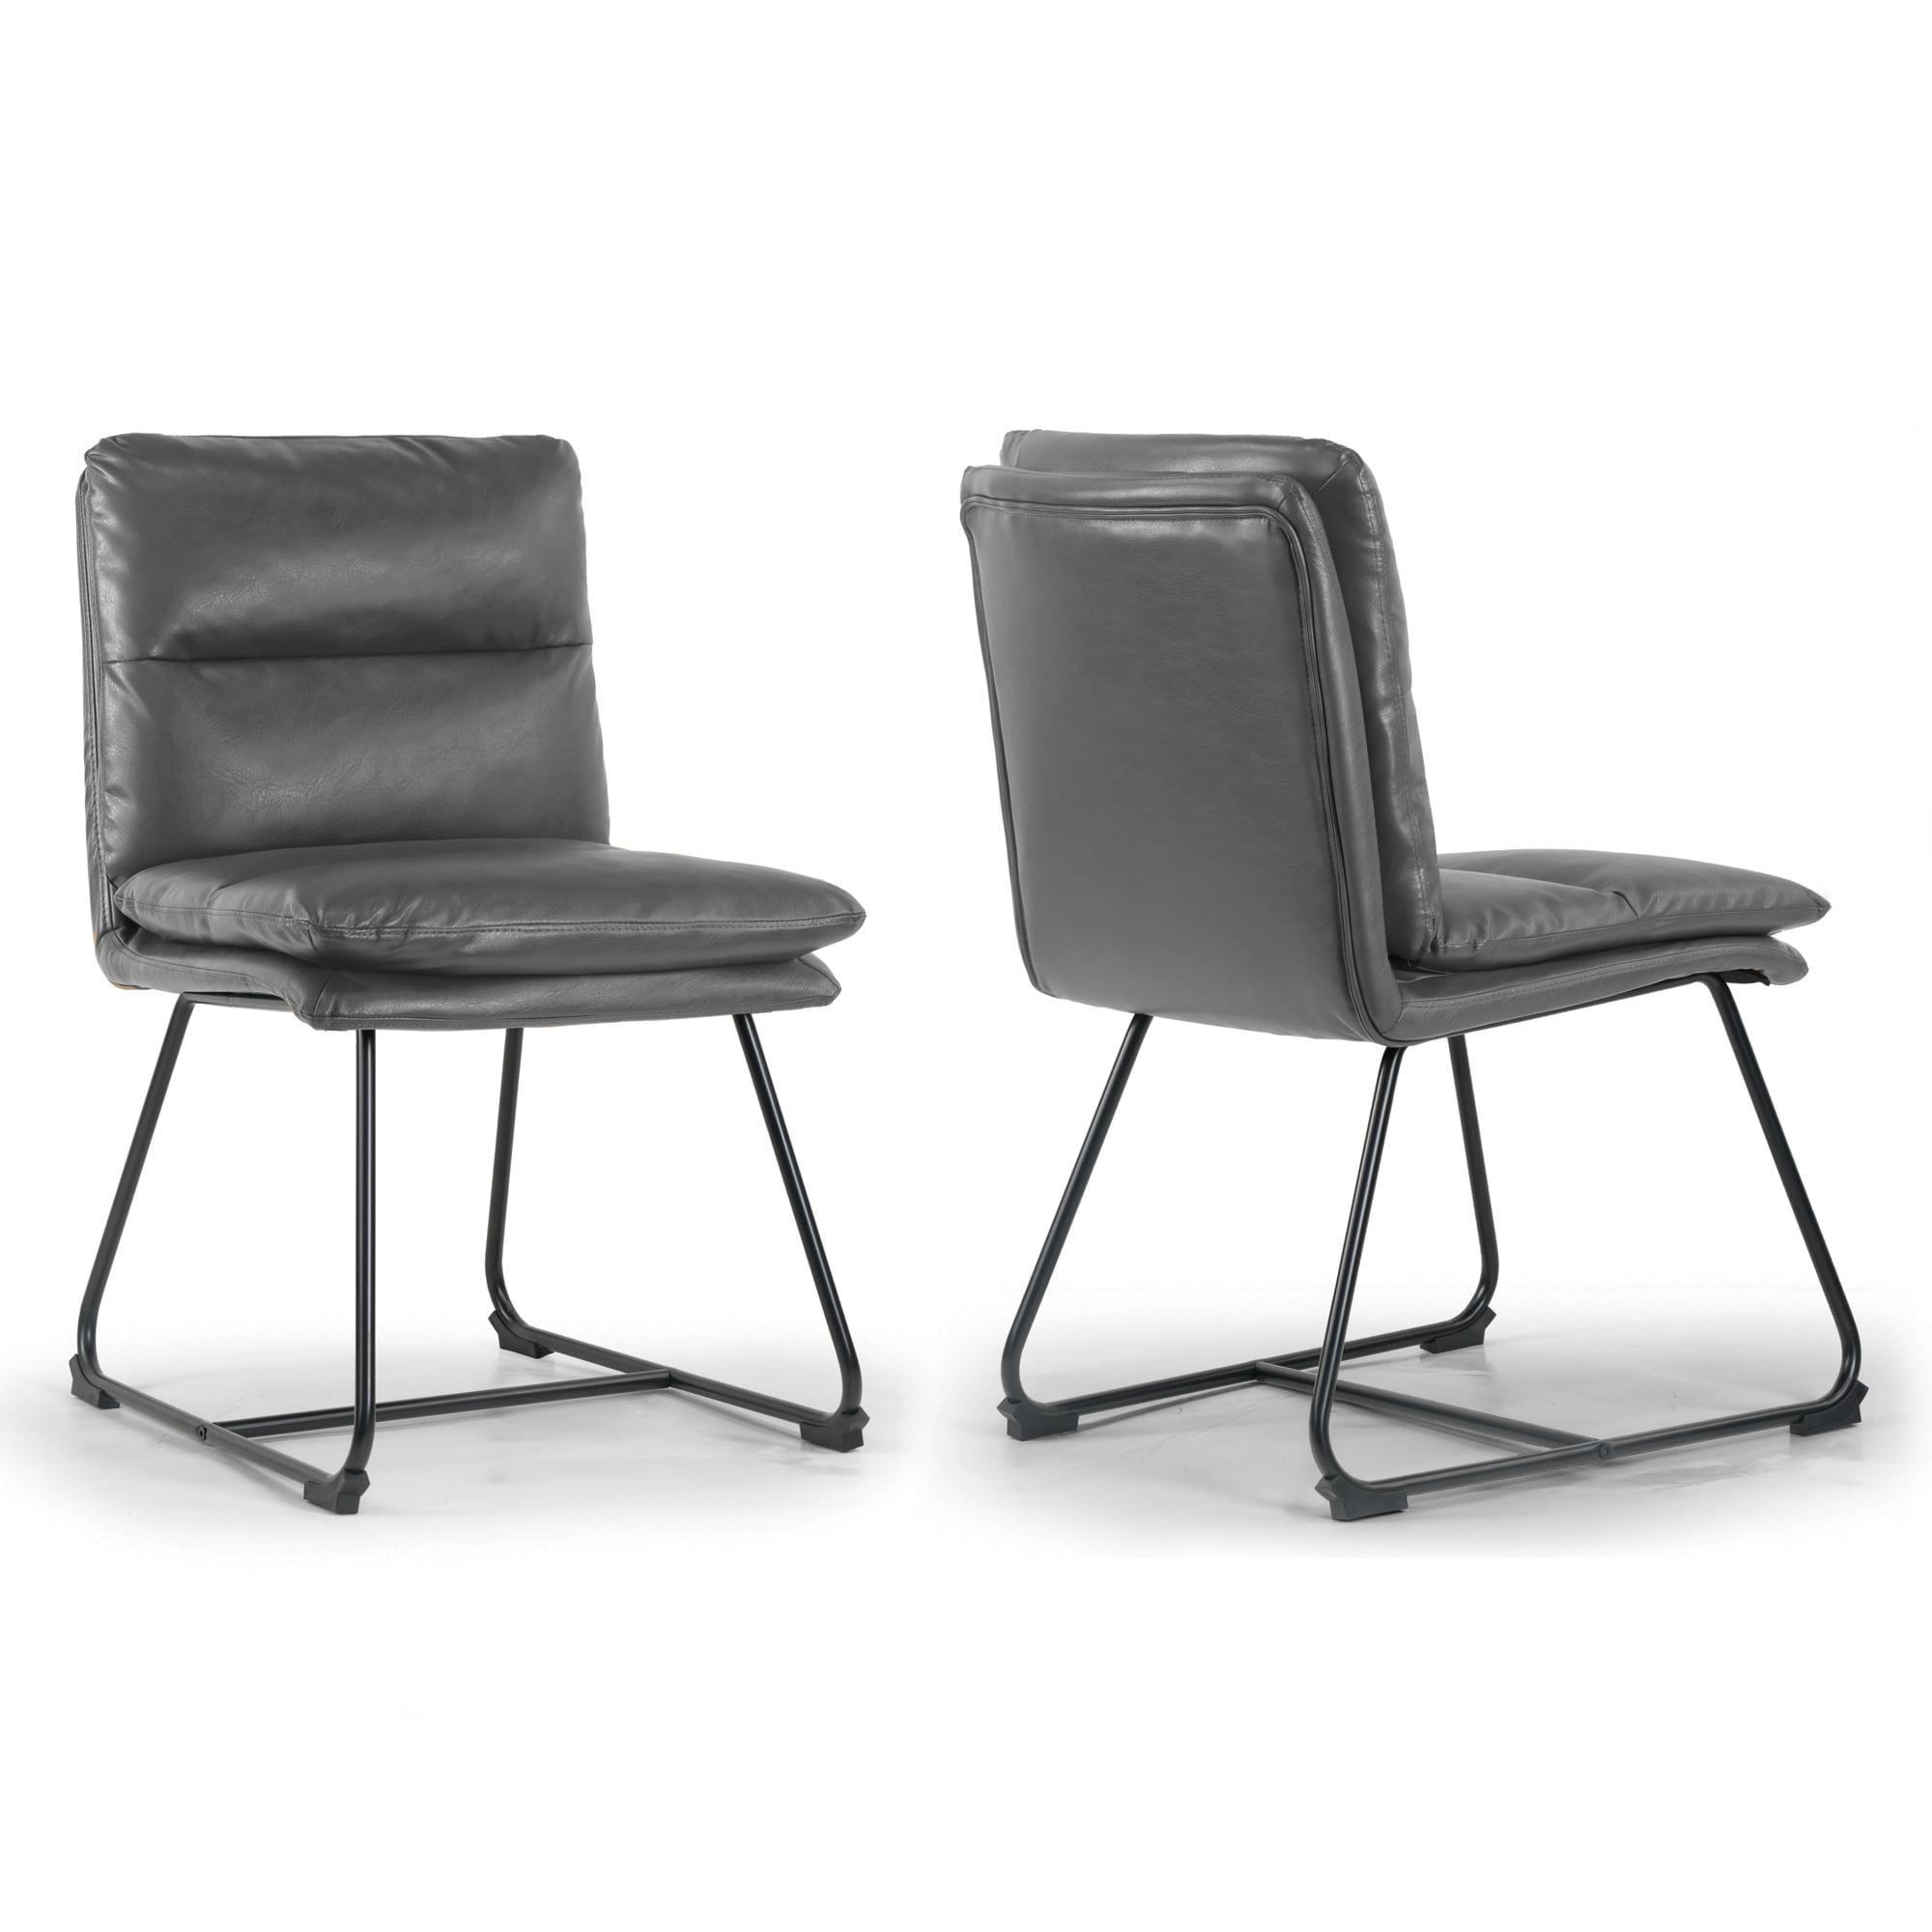 Set of 2 Gray Faux Leather Upholstered Dining Chairs with Iron Frame